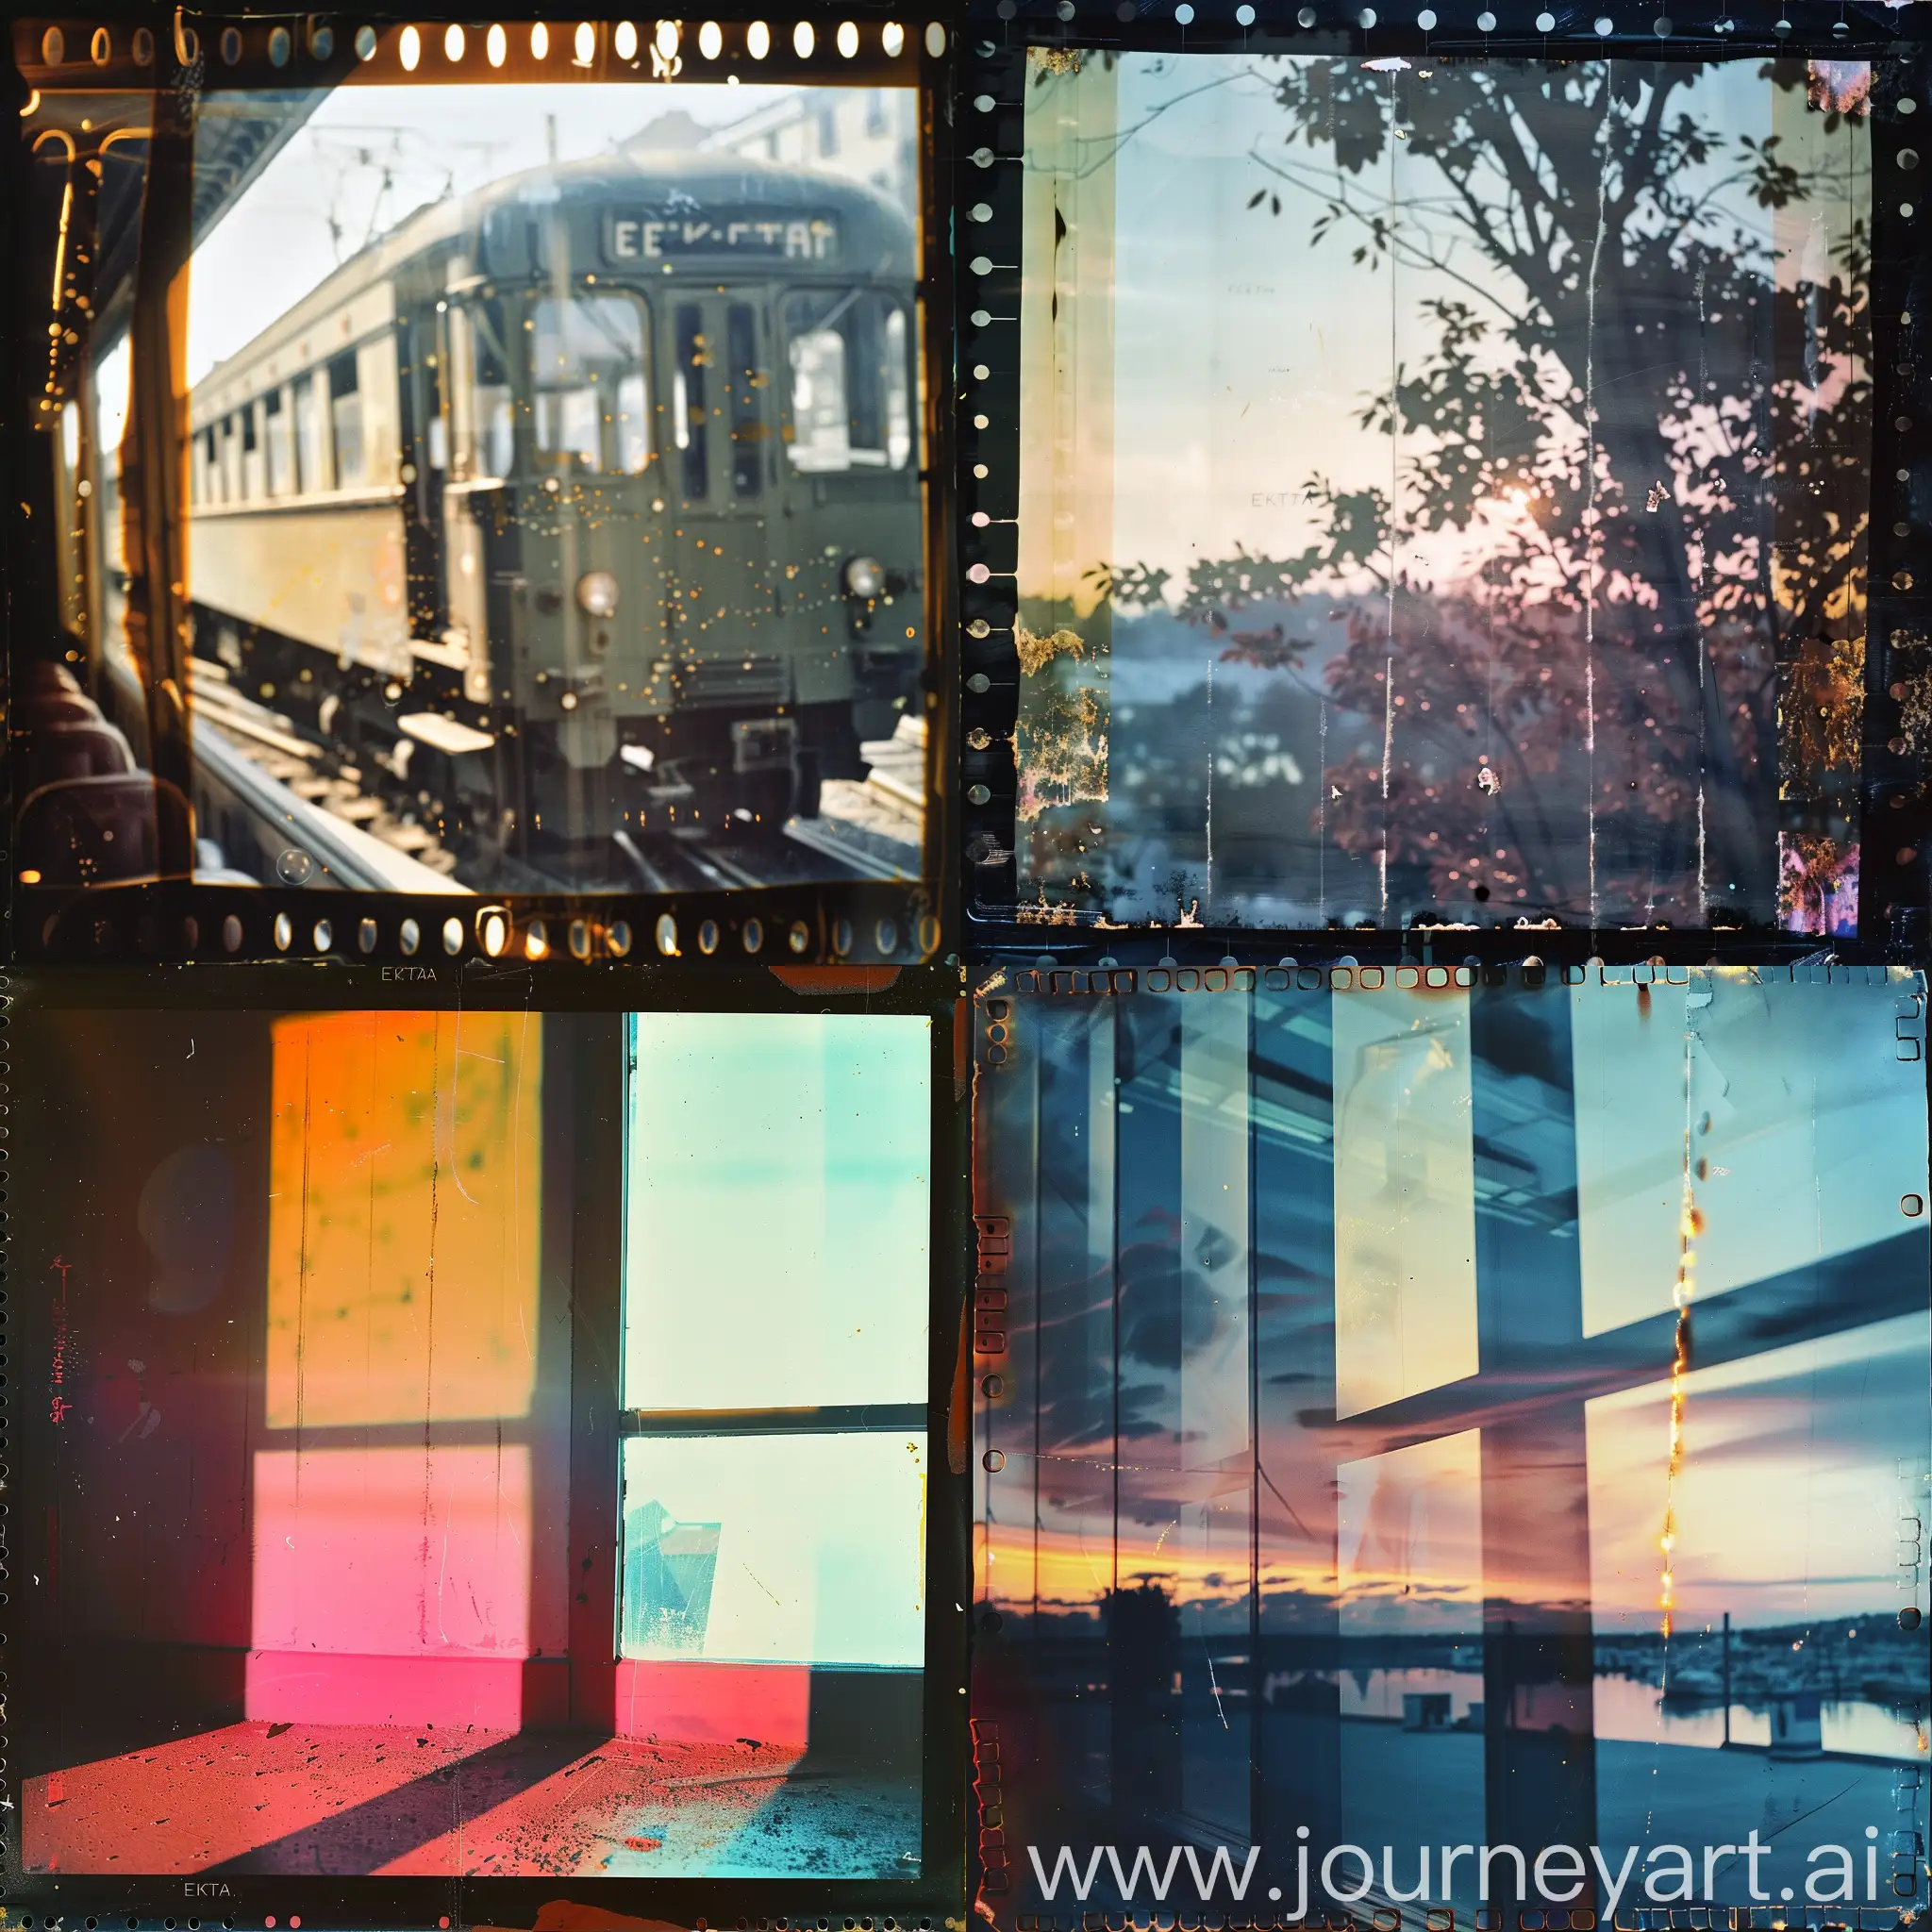 Vibrant-Color-Negative-Film-Ektar-Image-of-Six-Subjects-in-a-Square-Aspect-Ratio